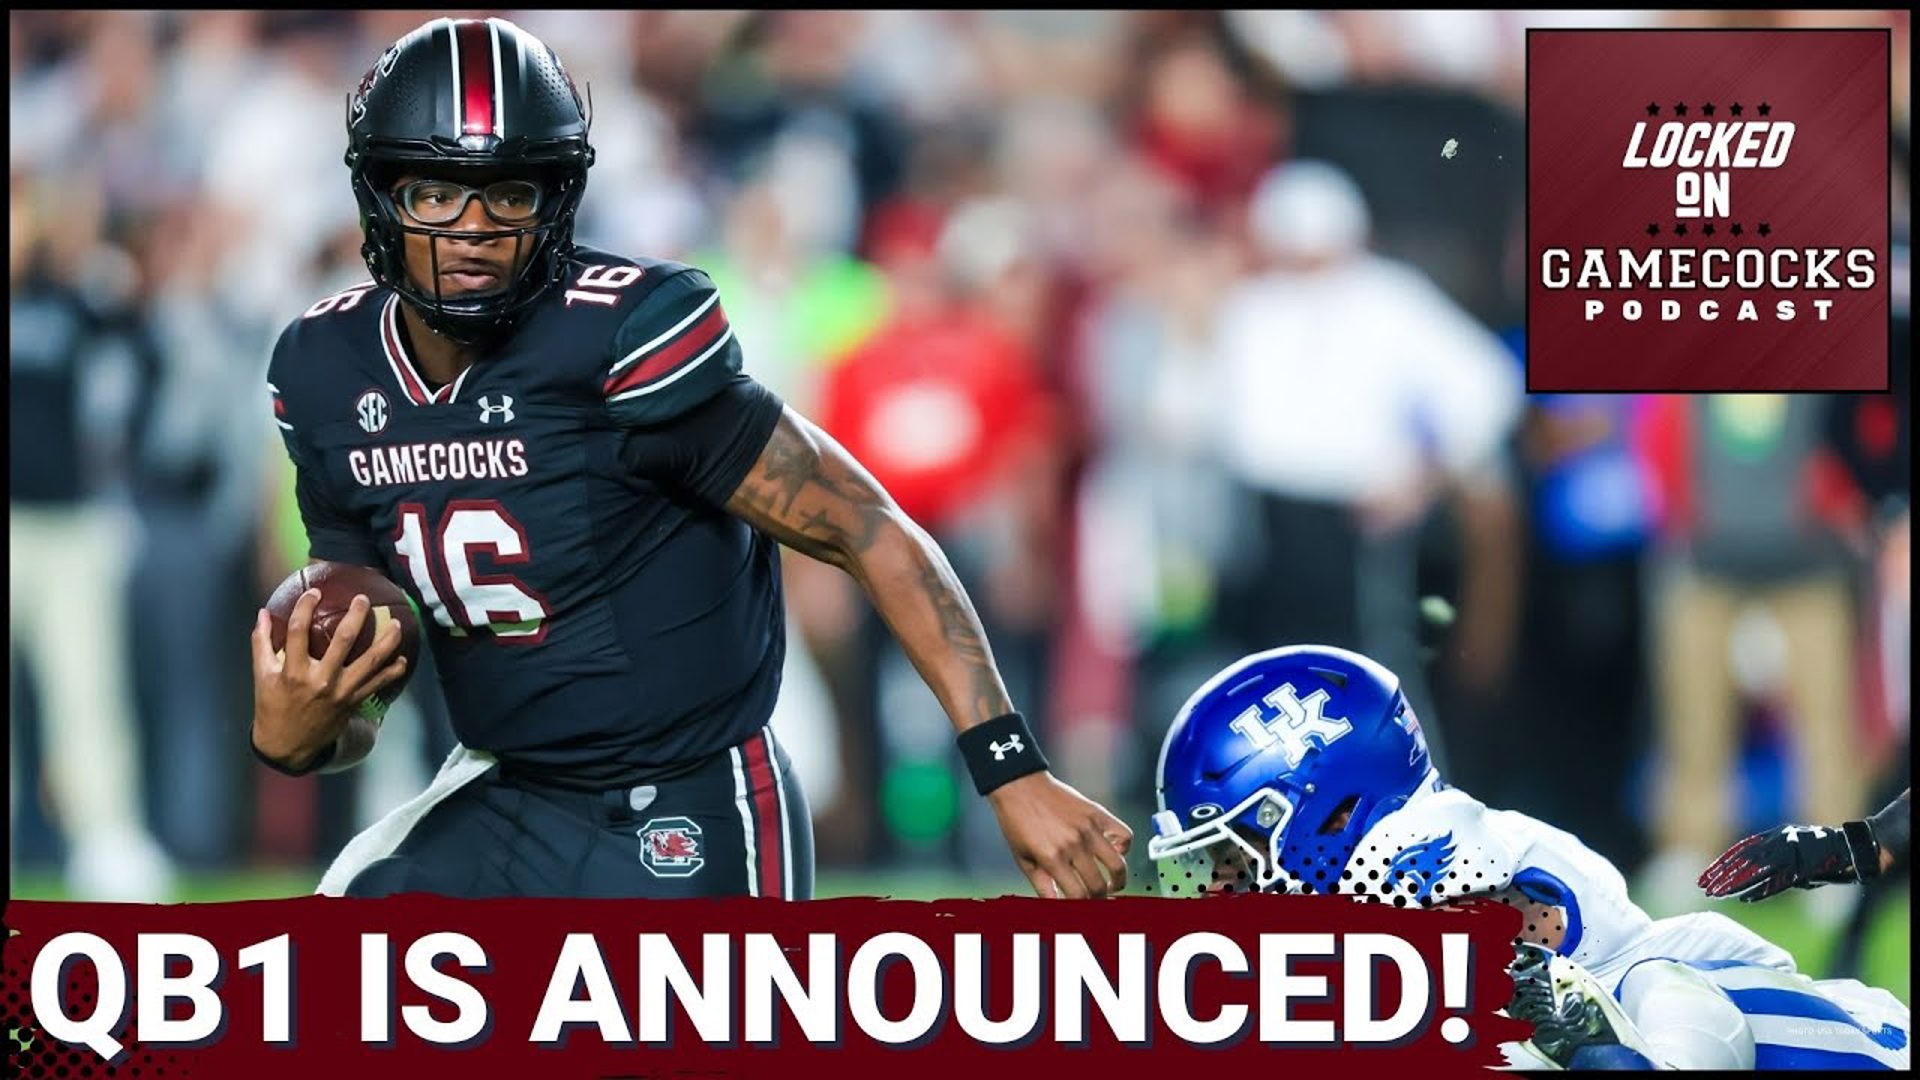 LaNorris Sellers Being Named The Starting QB Brings More Pros Than Cons! | South Carolina Football